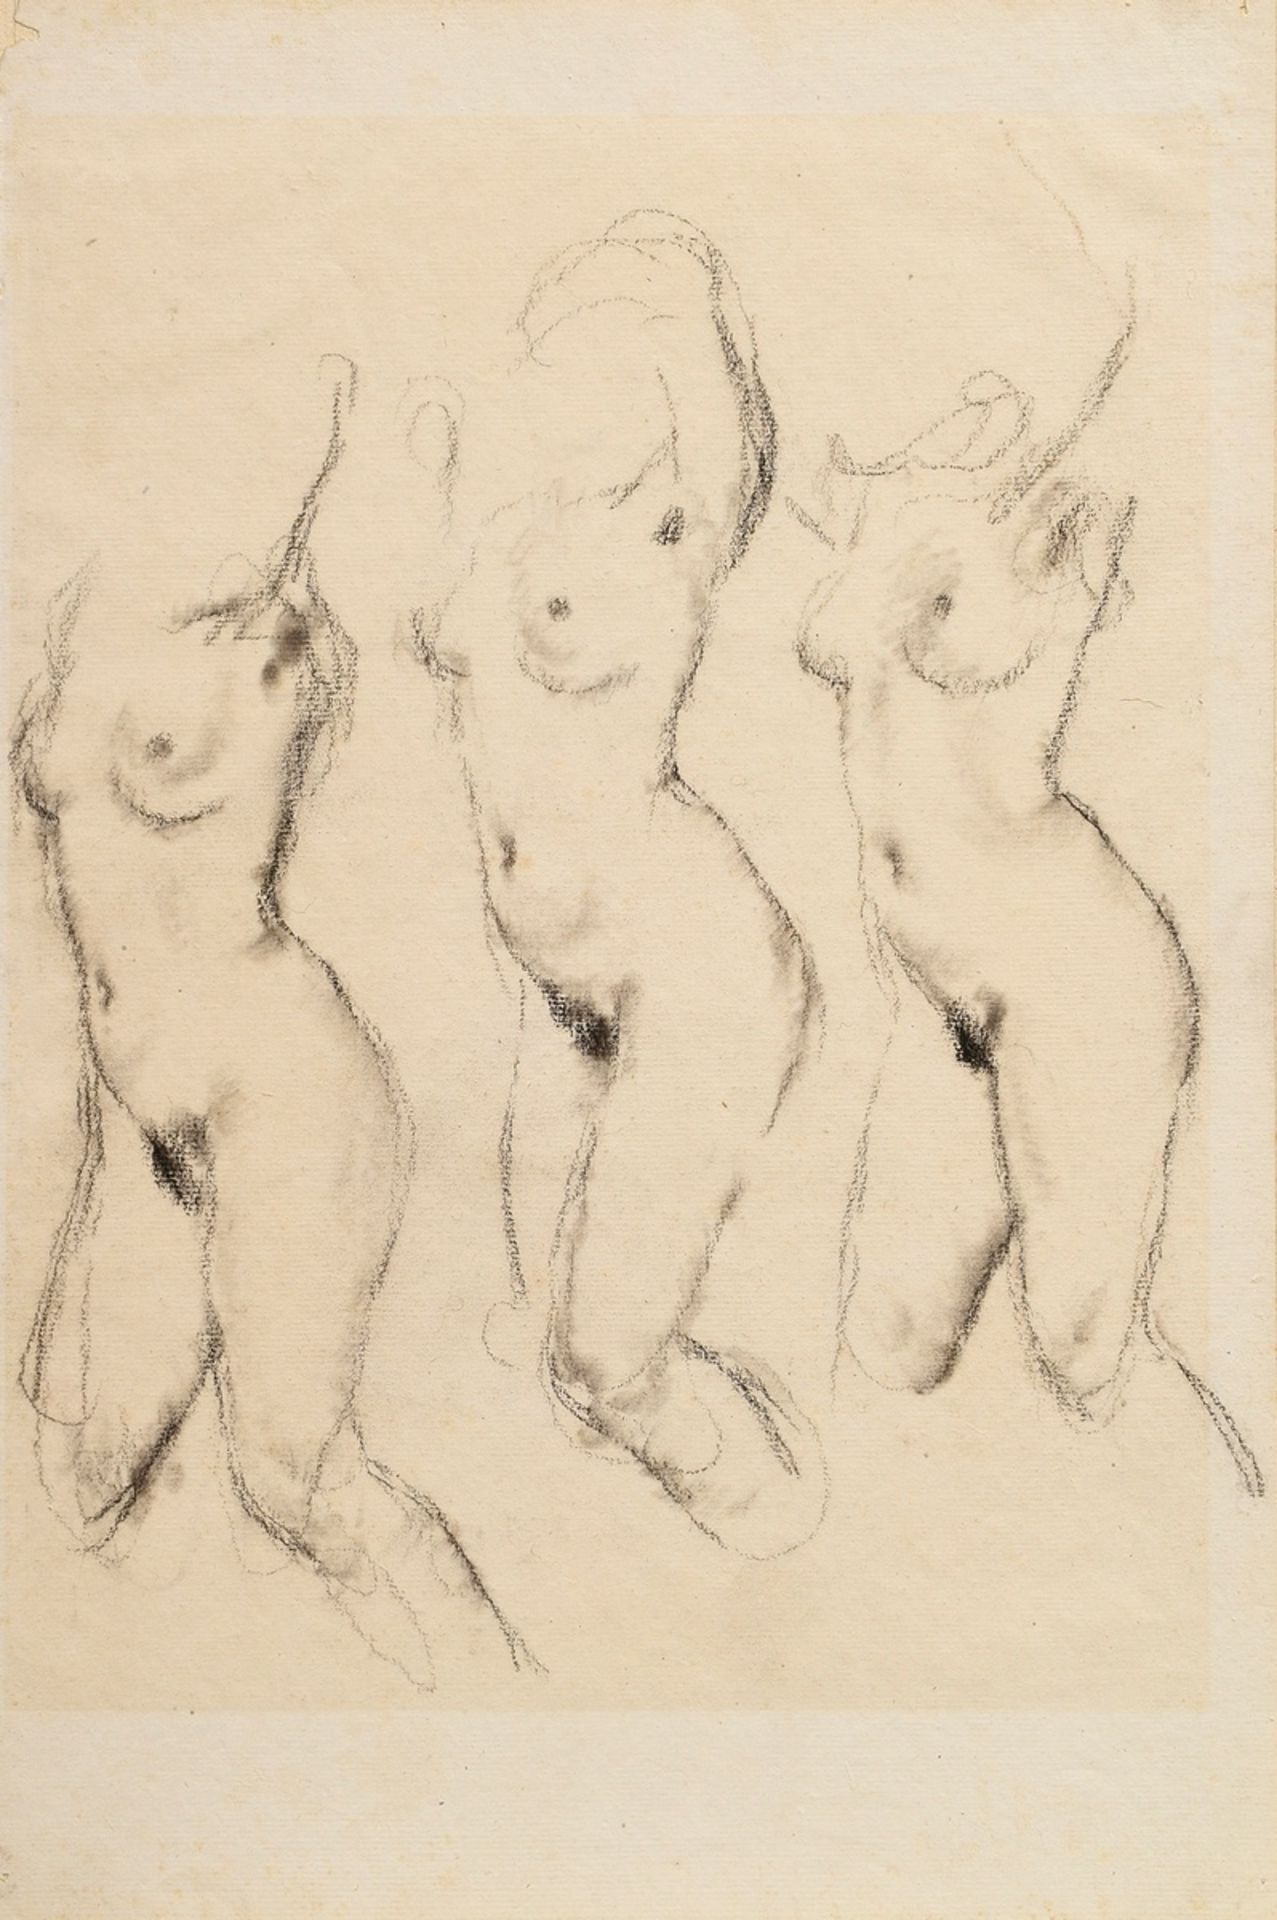 17 Mayershofer, Max (1875-1950) "Female nude drawings", charcoal, each sign., each mounted in passe - Image 17 of 19